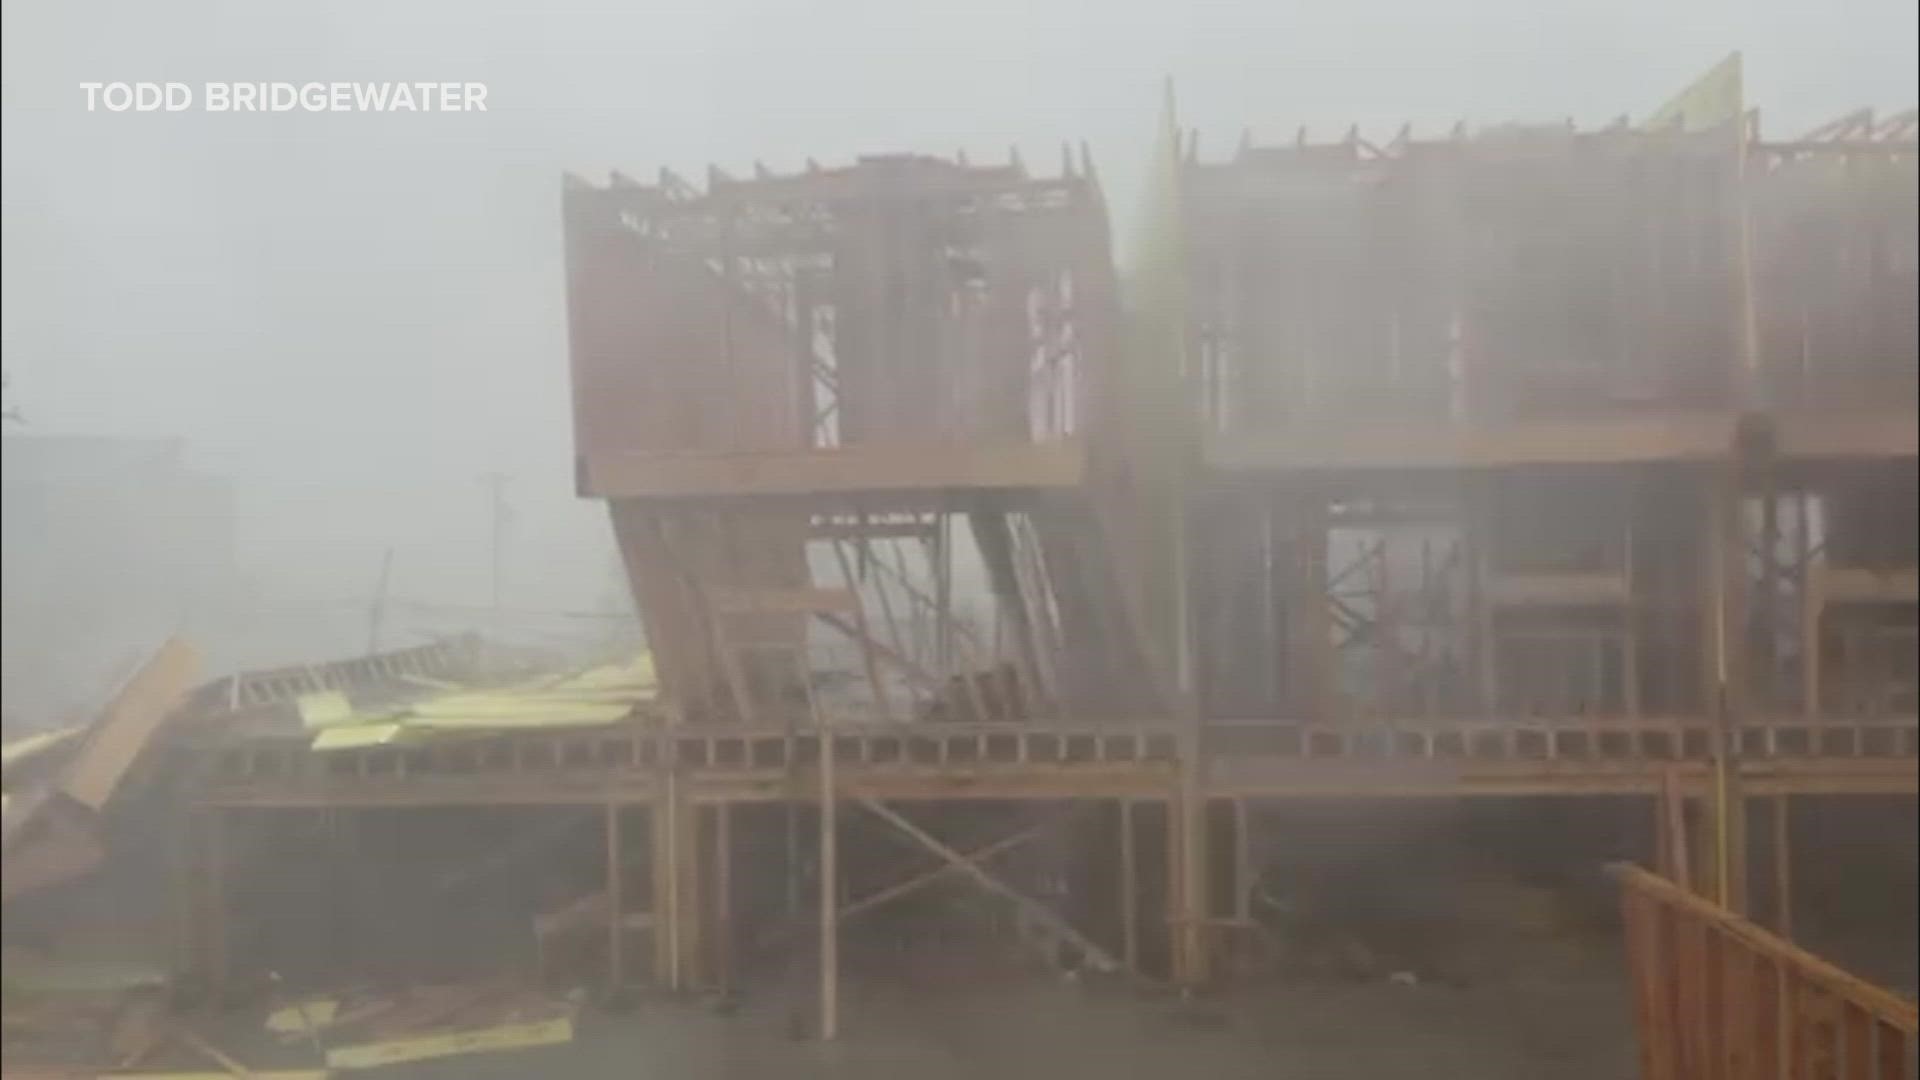 A structure under construction in the Old East Dallas area collapsed on Sunday afternoon as storms with high winds moved through North Texas.